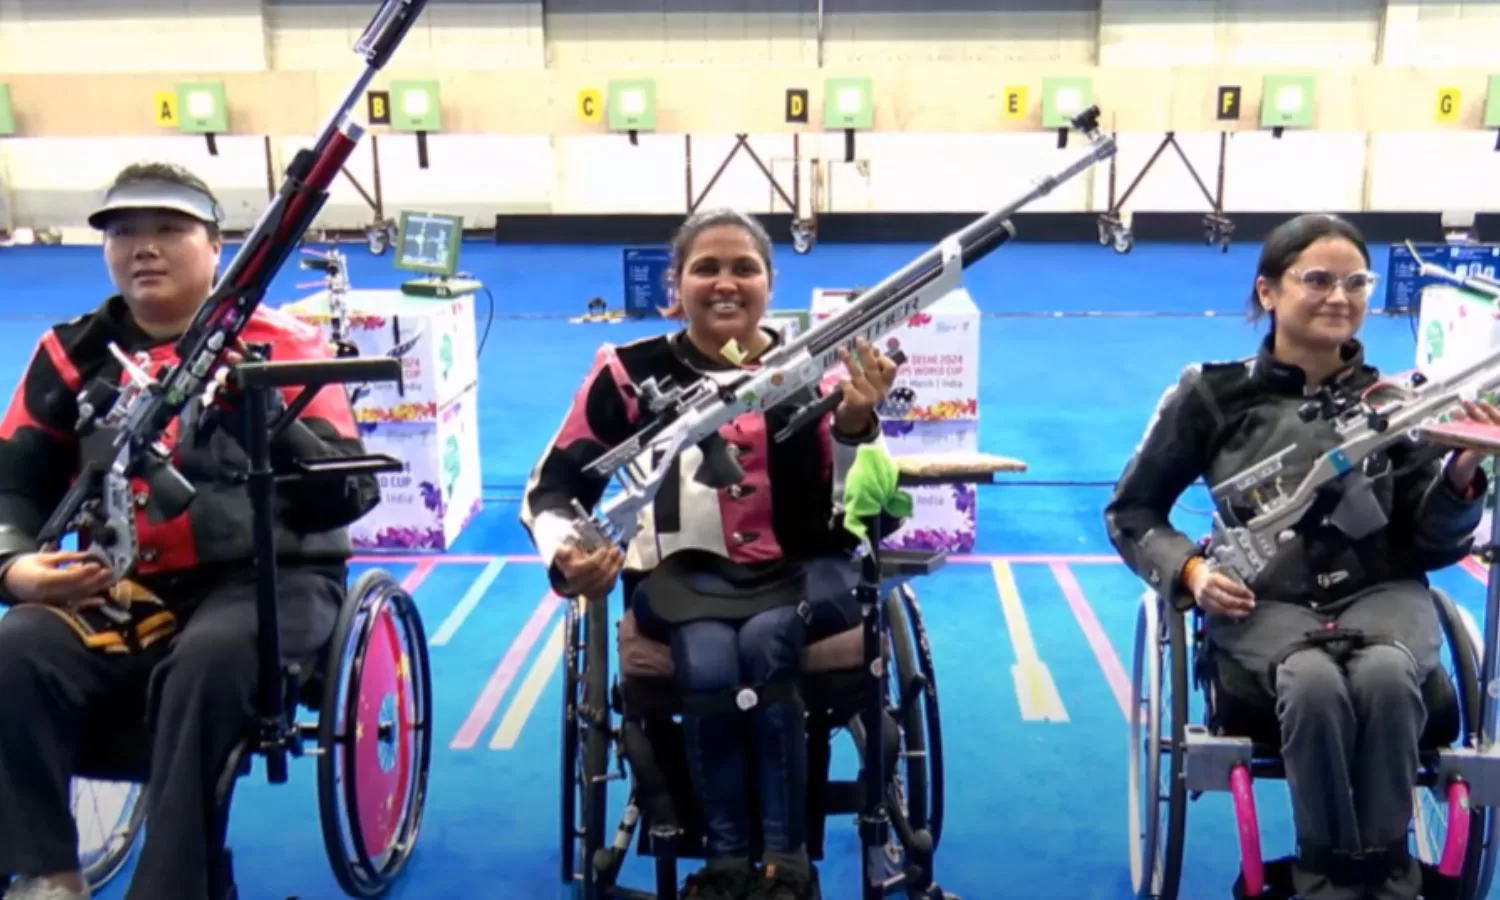 India receives praise for hosting Para Shooting World Cup successfully